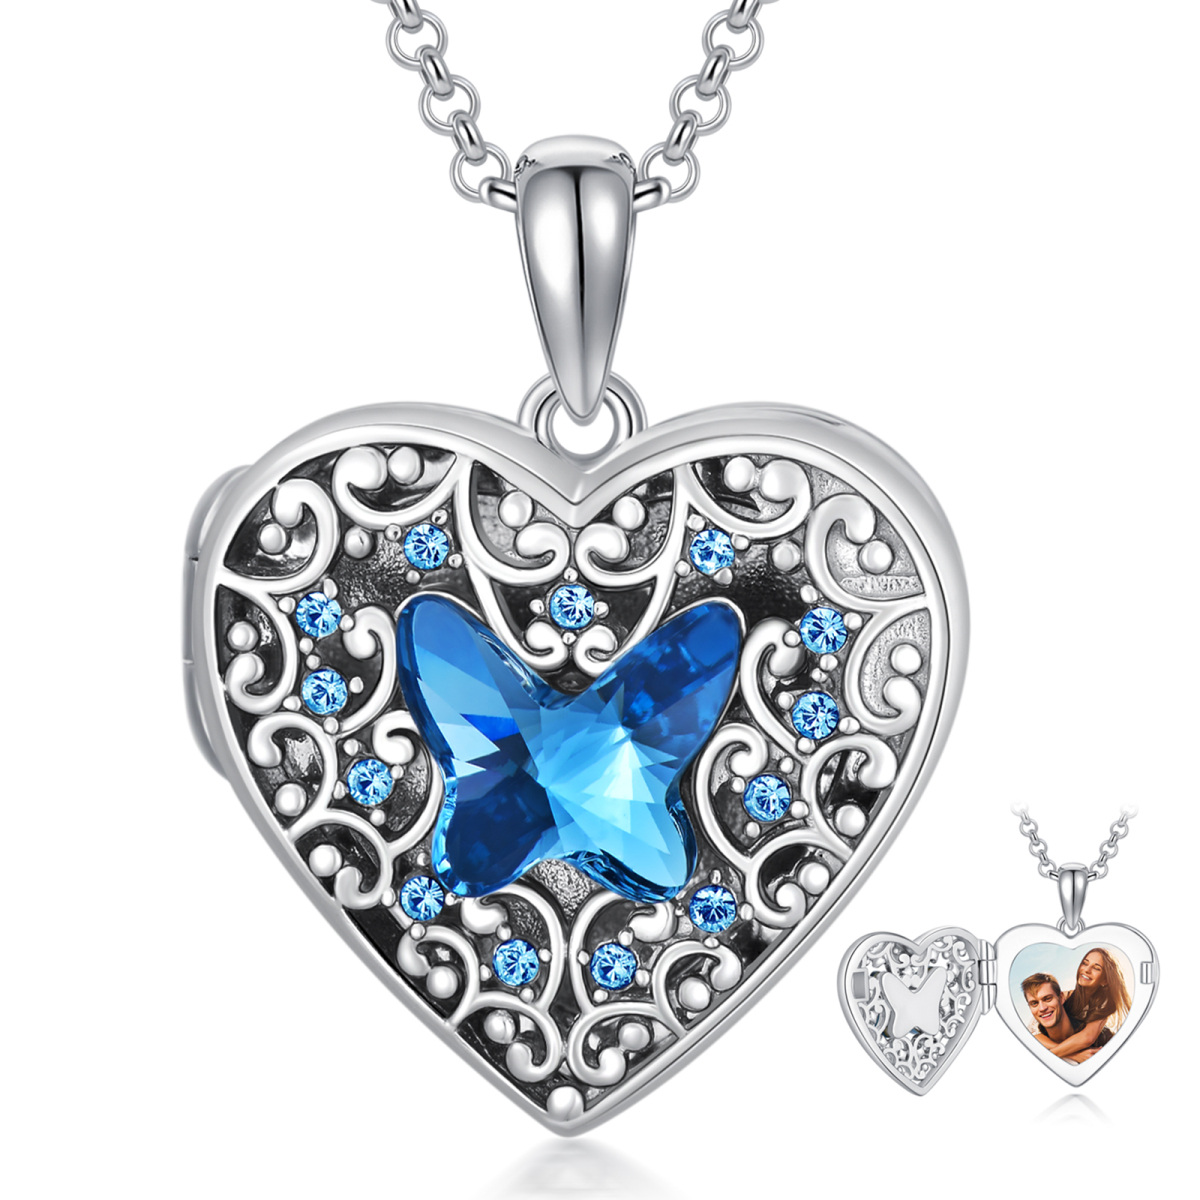 Sterling Silver Heart Shaped Crystal Personalized Photo & Heart Personalized Photo Locket Necklace-1